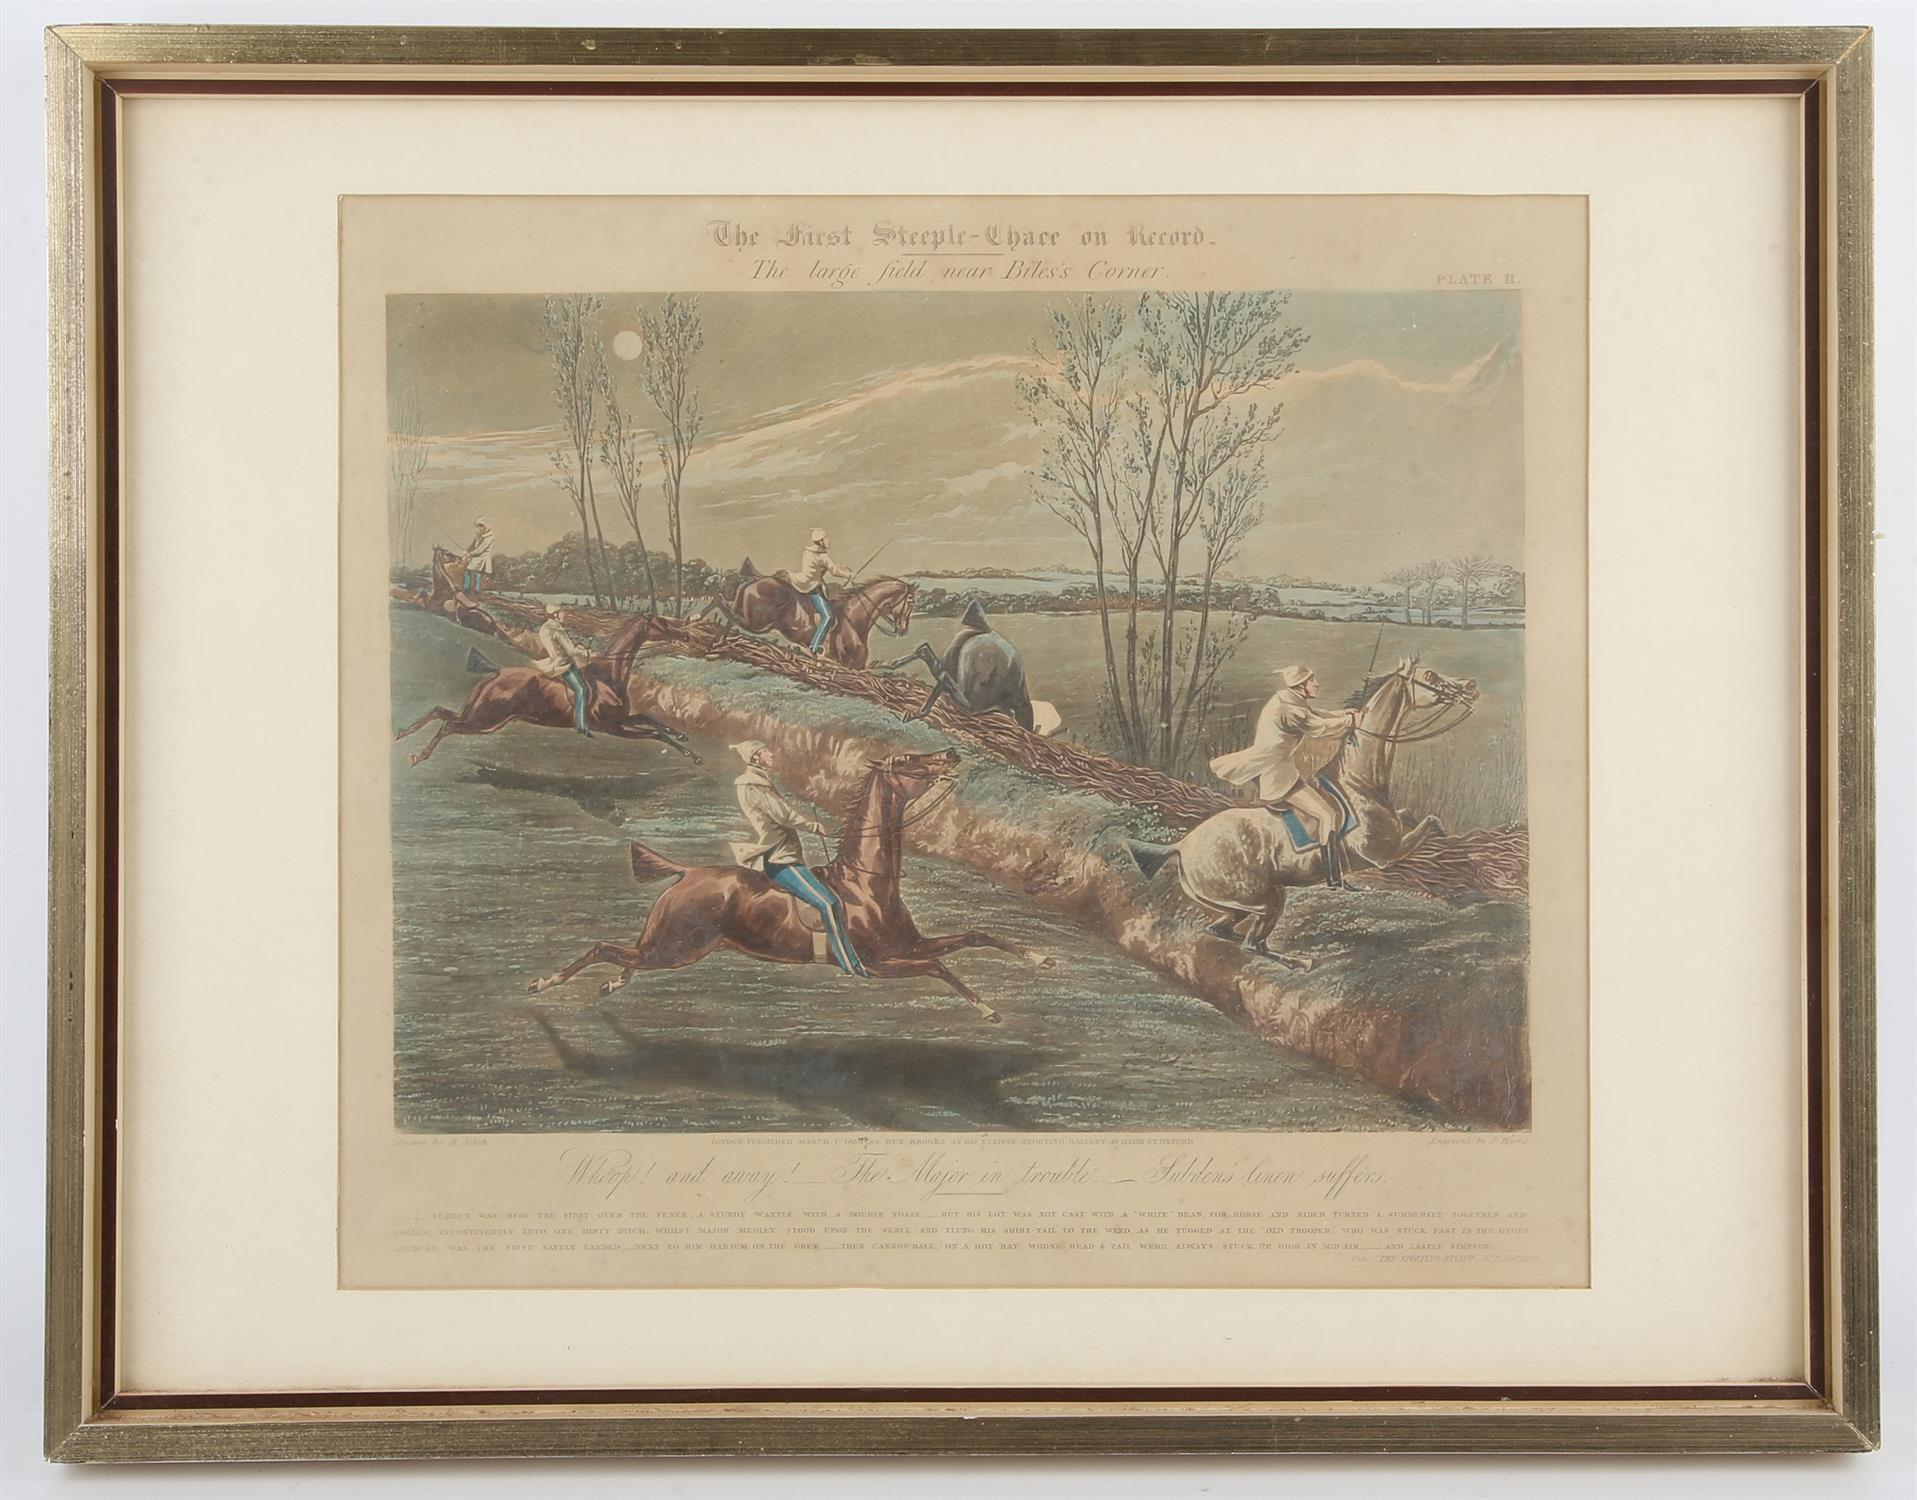 After Henry Alken, The First Steeple-Chase on Record, plates I - IV, a set of four aquatints by - Image 4 of 4